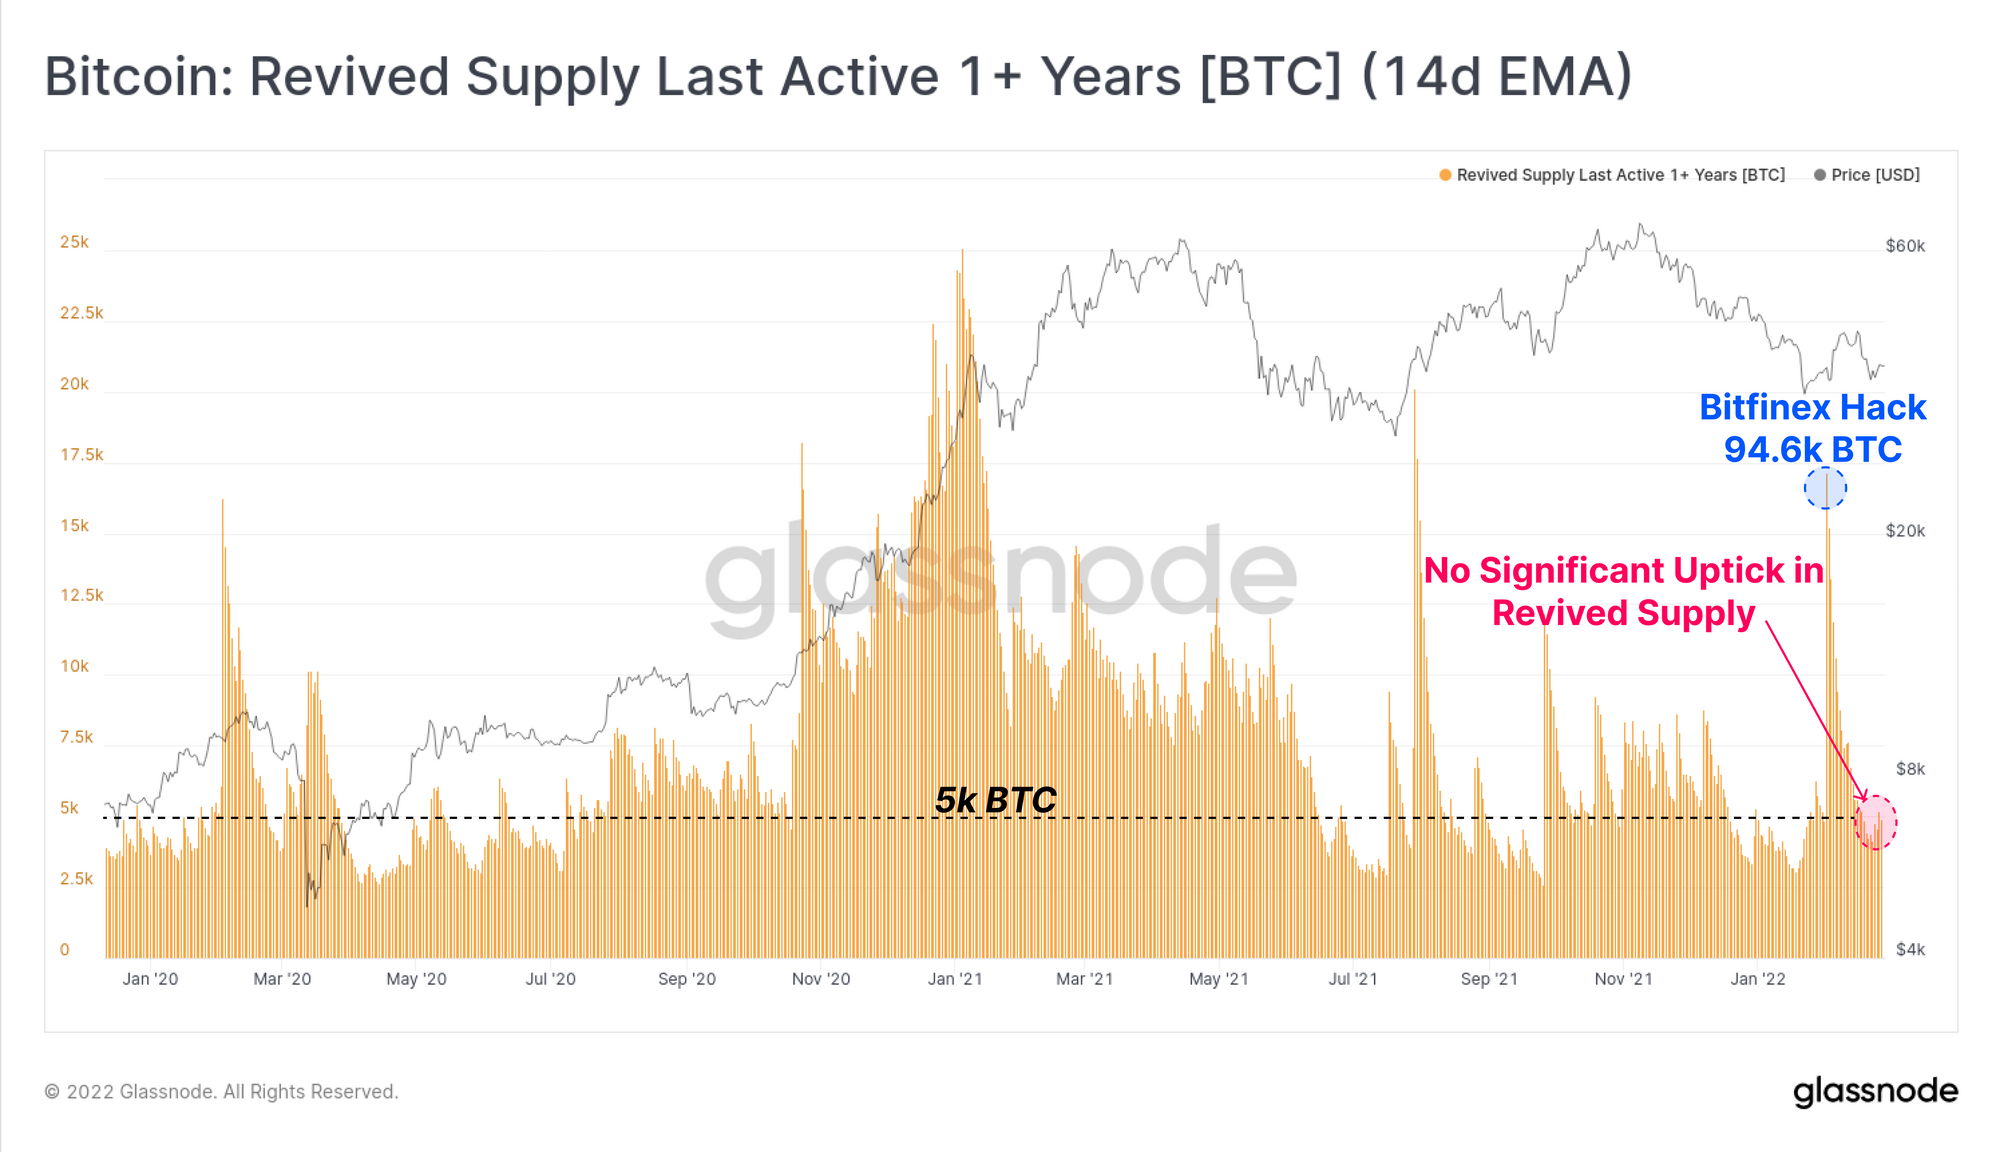 Bitcoin Revived Supply Last Active 1+ Years